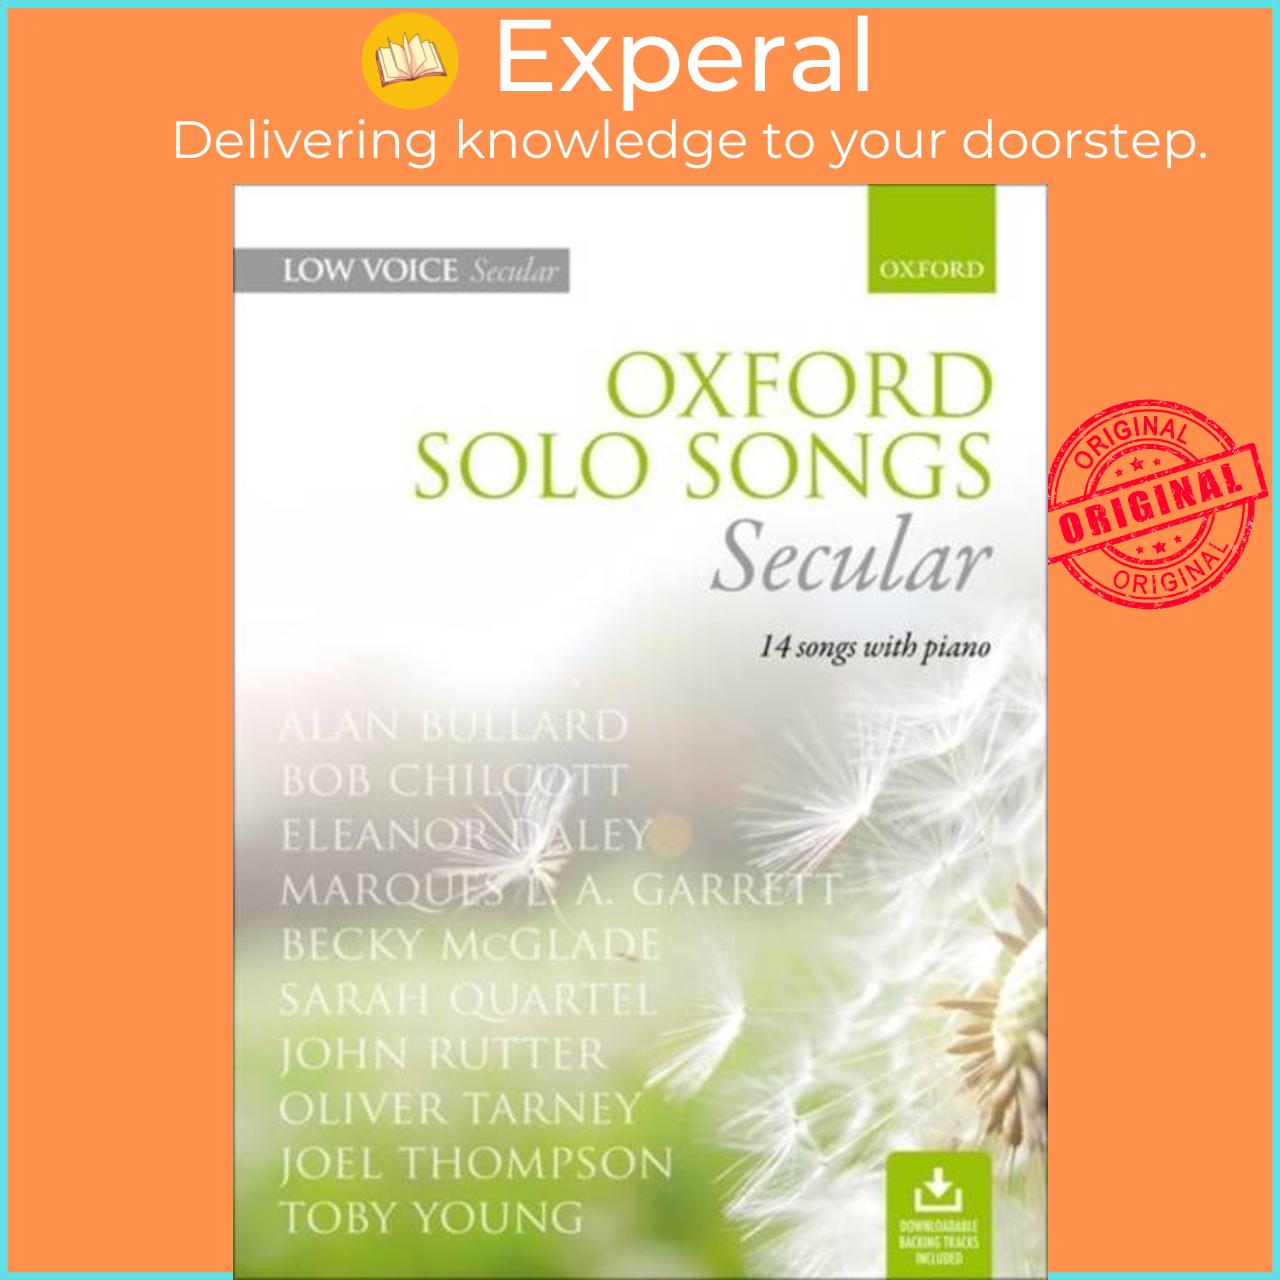 Sách - Oxford Solo Songs: Secular - 14 songs with piano by Oxford (UK edition, paperback)